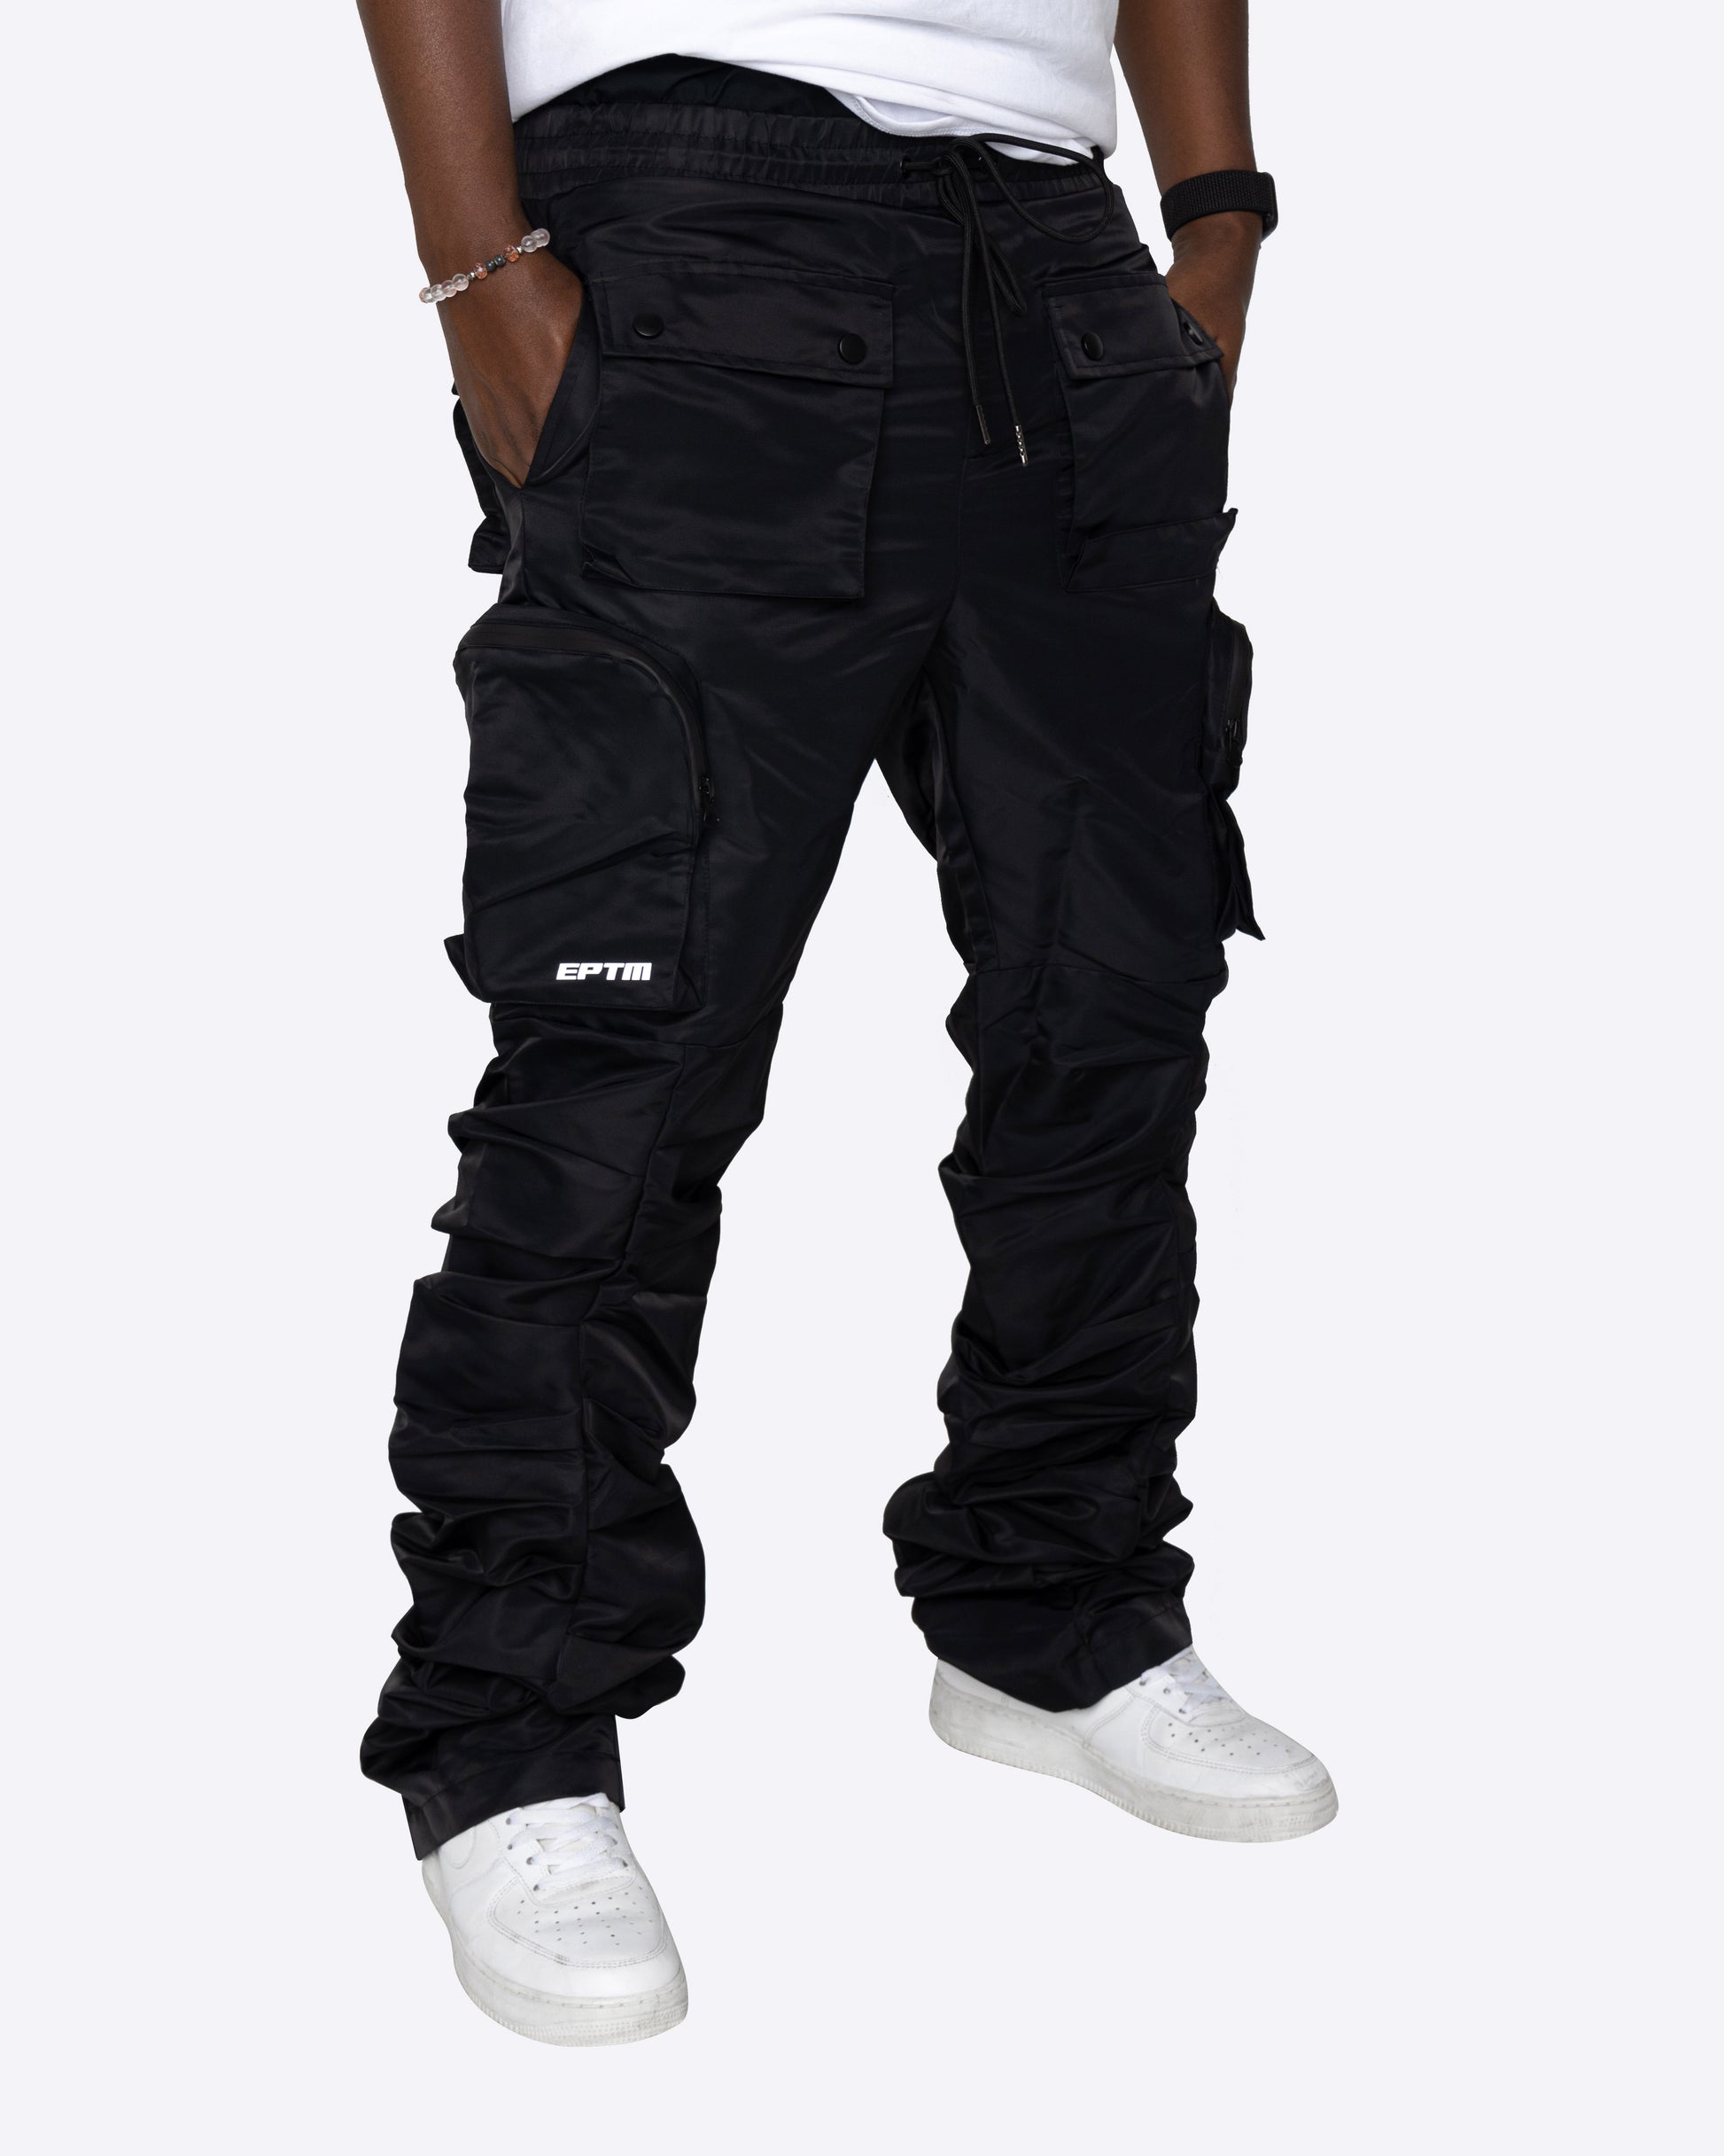 EPTM CARGO STACKED PANTS 3.0 - 8586